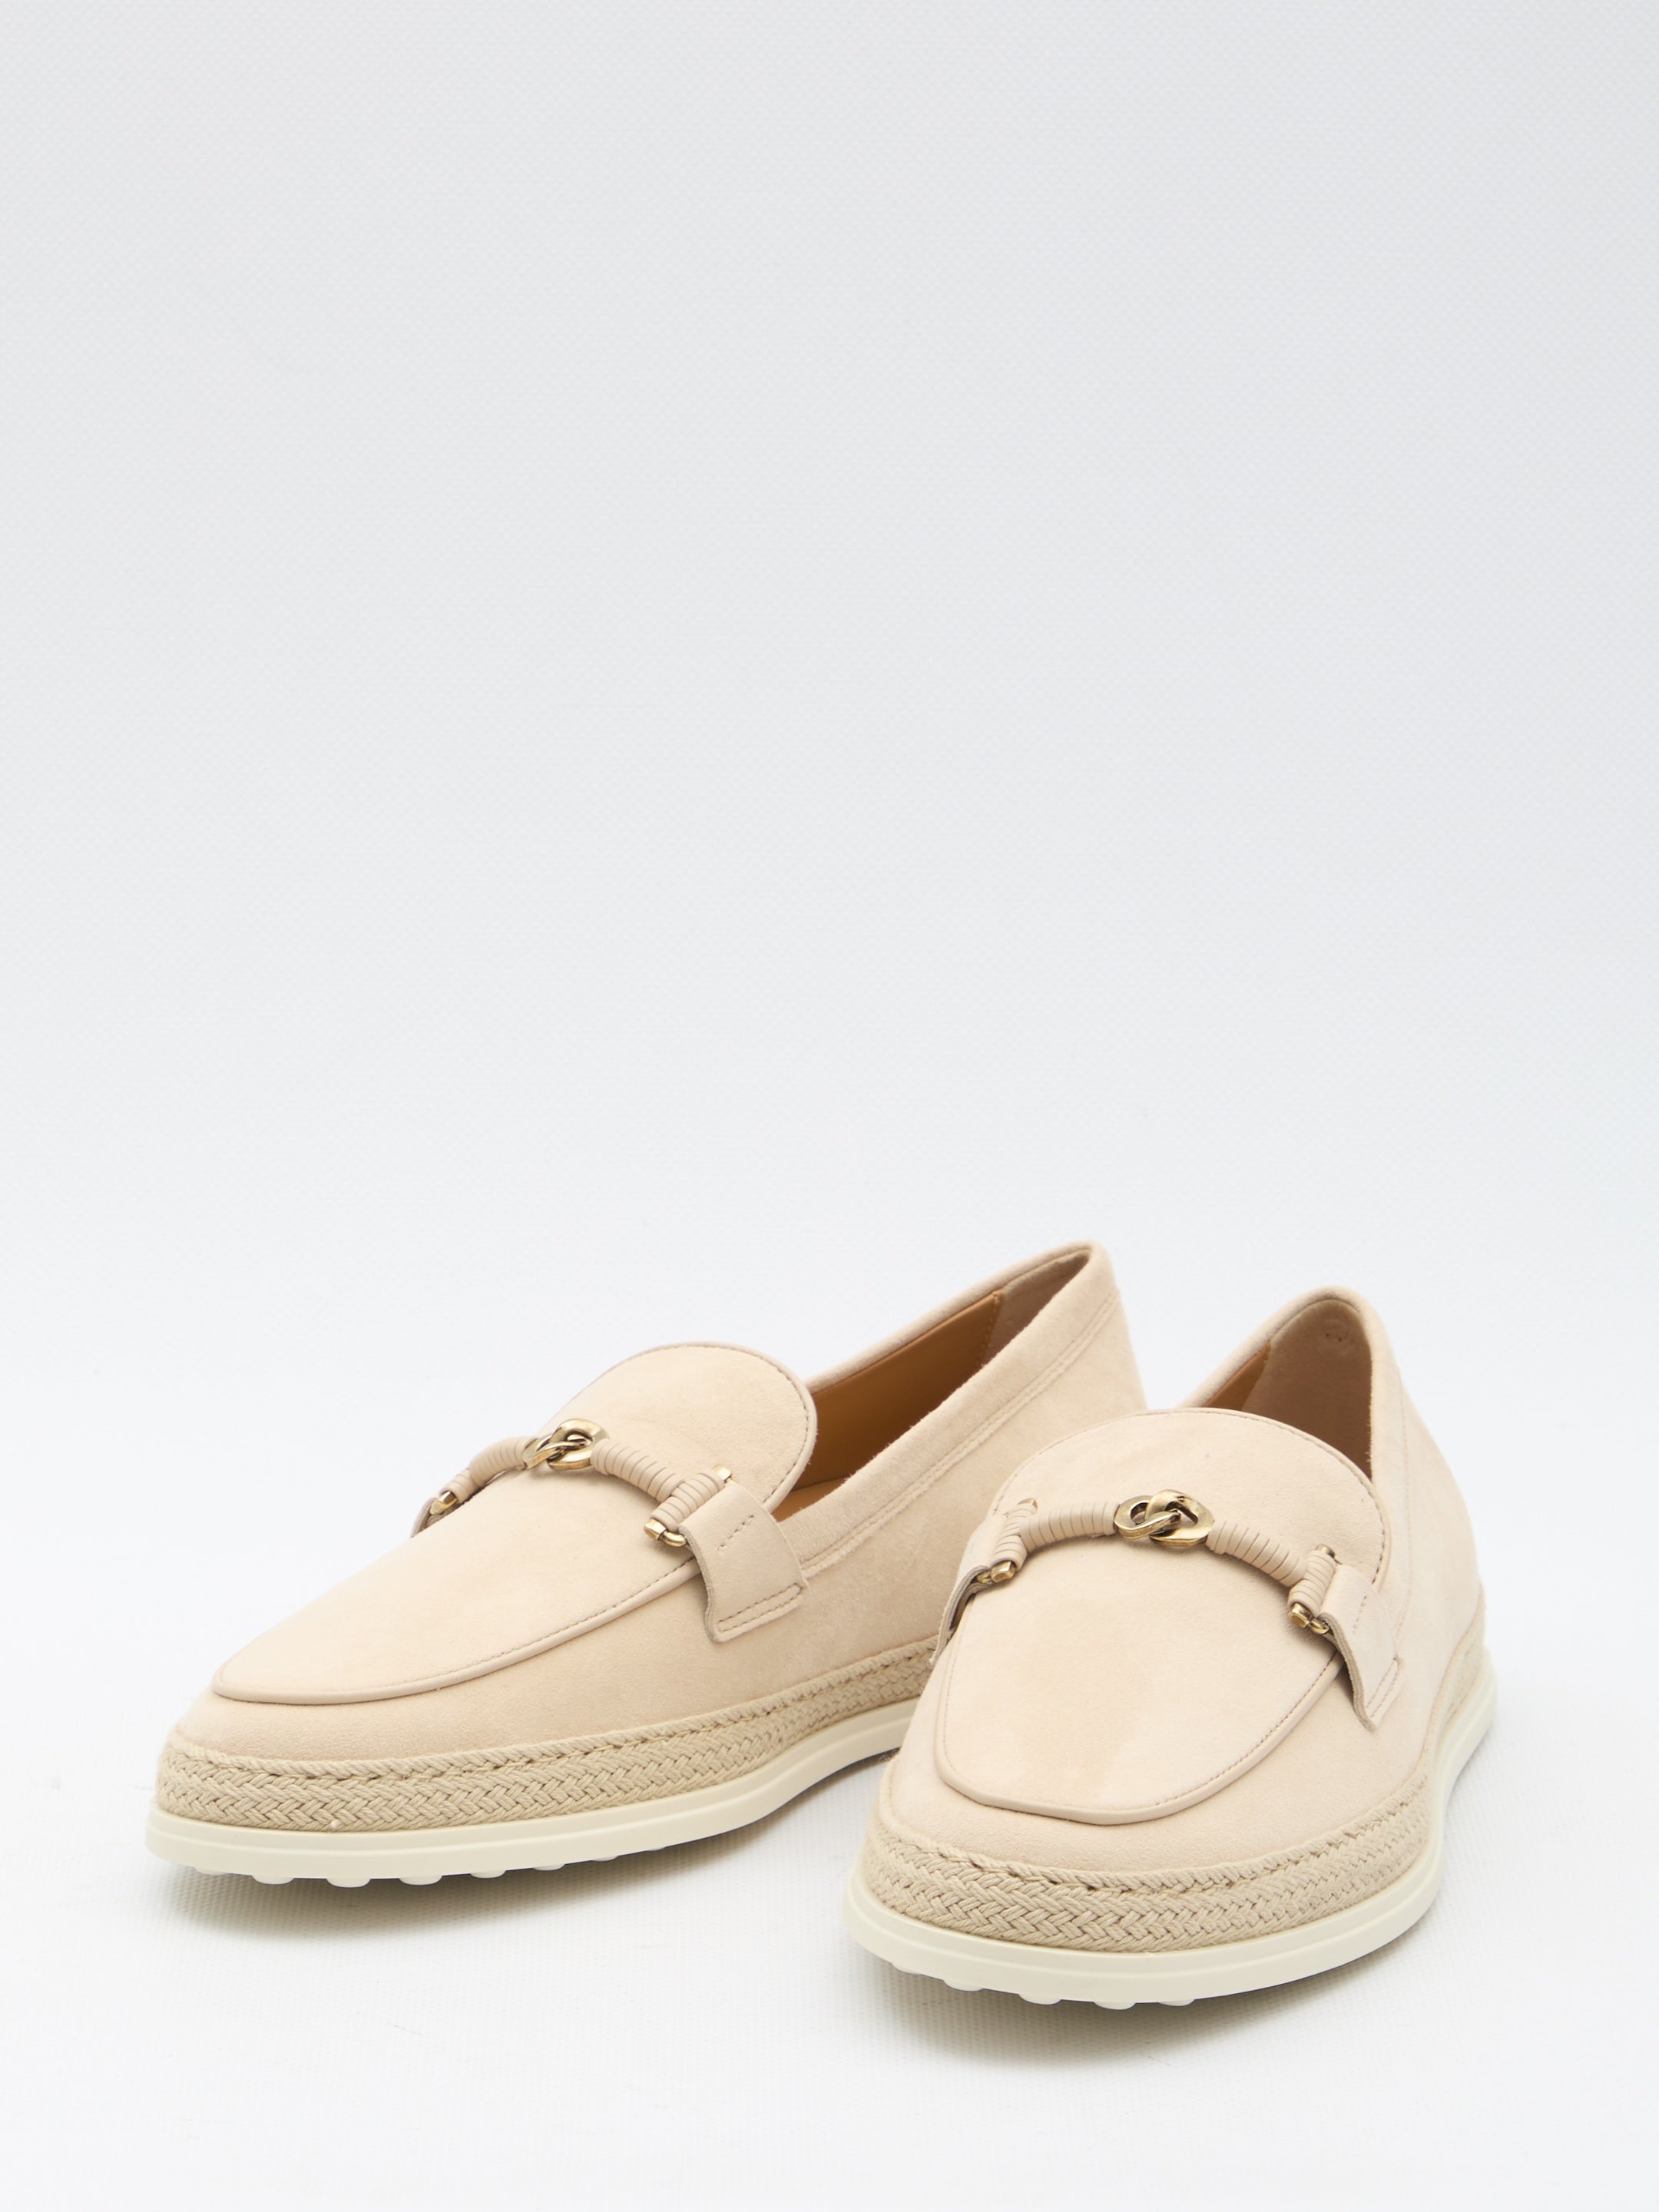 TODS-OUTLET-SALE-Suede-loafers-Flache-Schuhe-37-BEIGE-ARCHIVE-COLLECTION-2.jpg